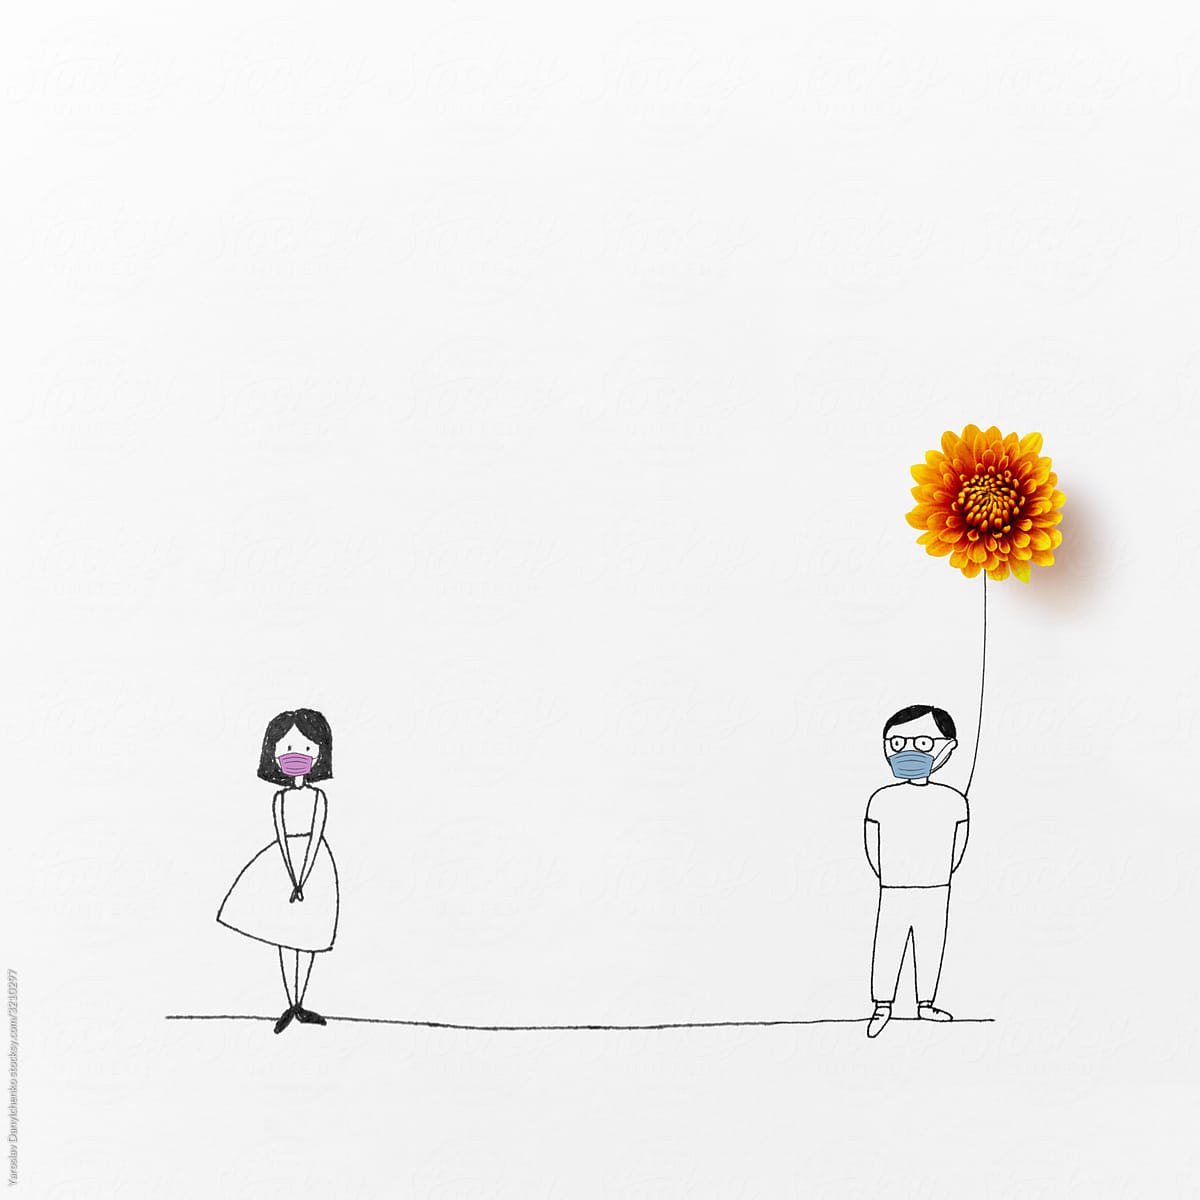 Drawn man and woman in masks on a distance.